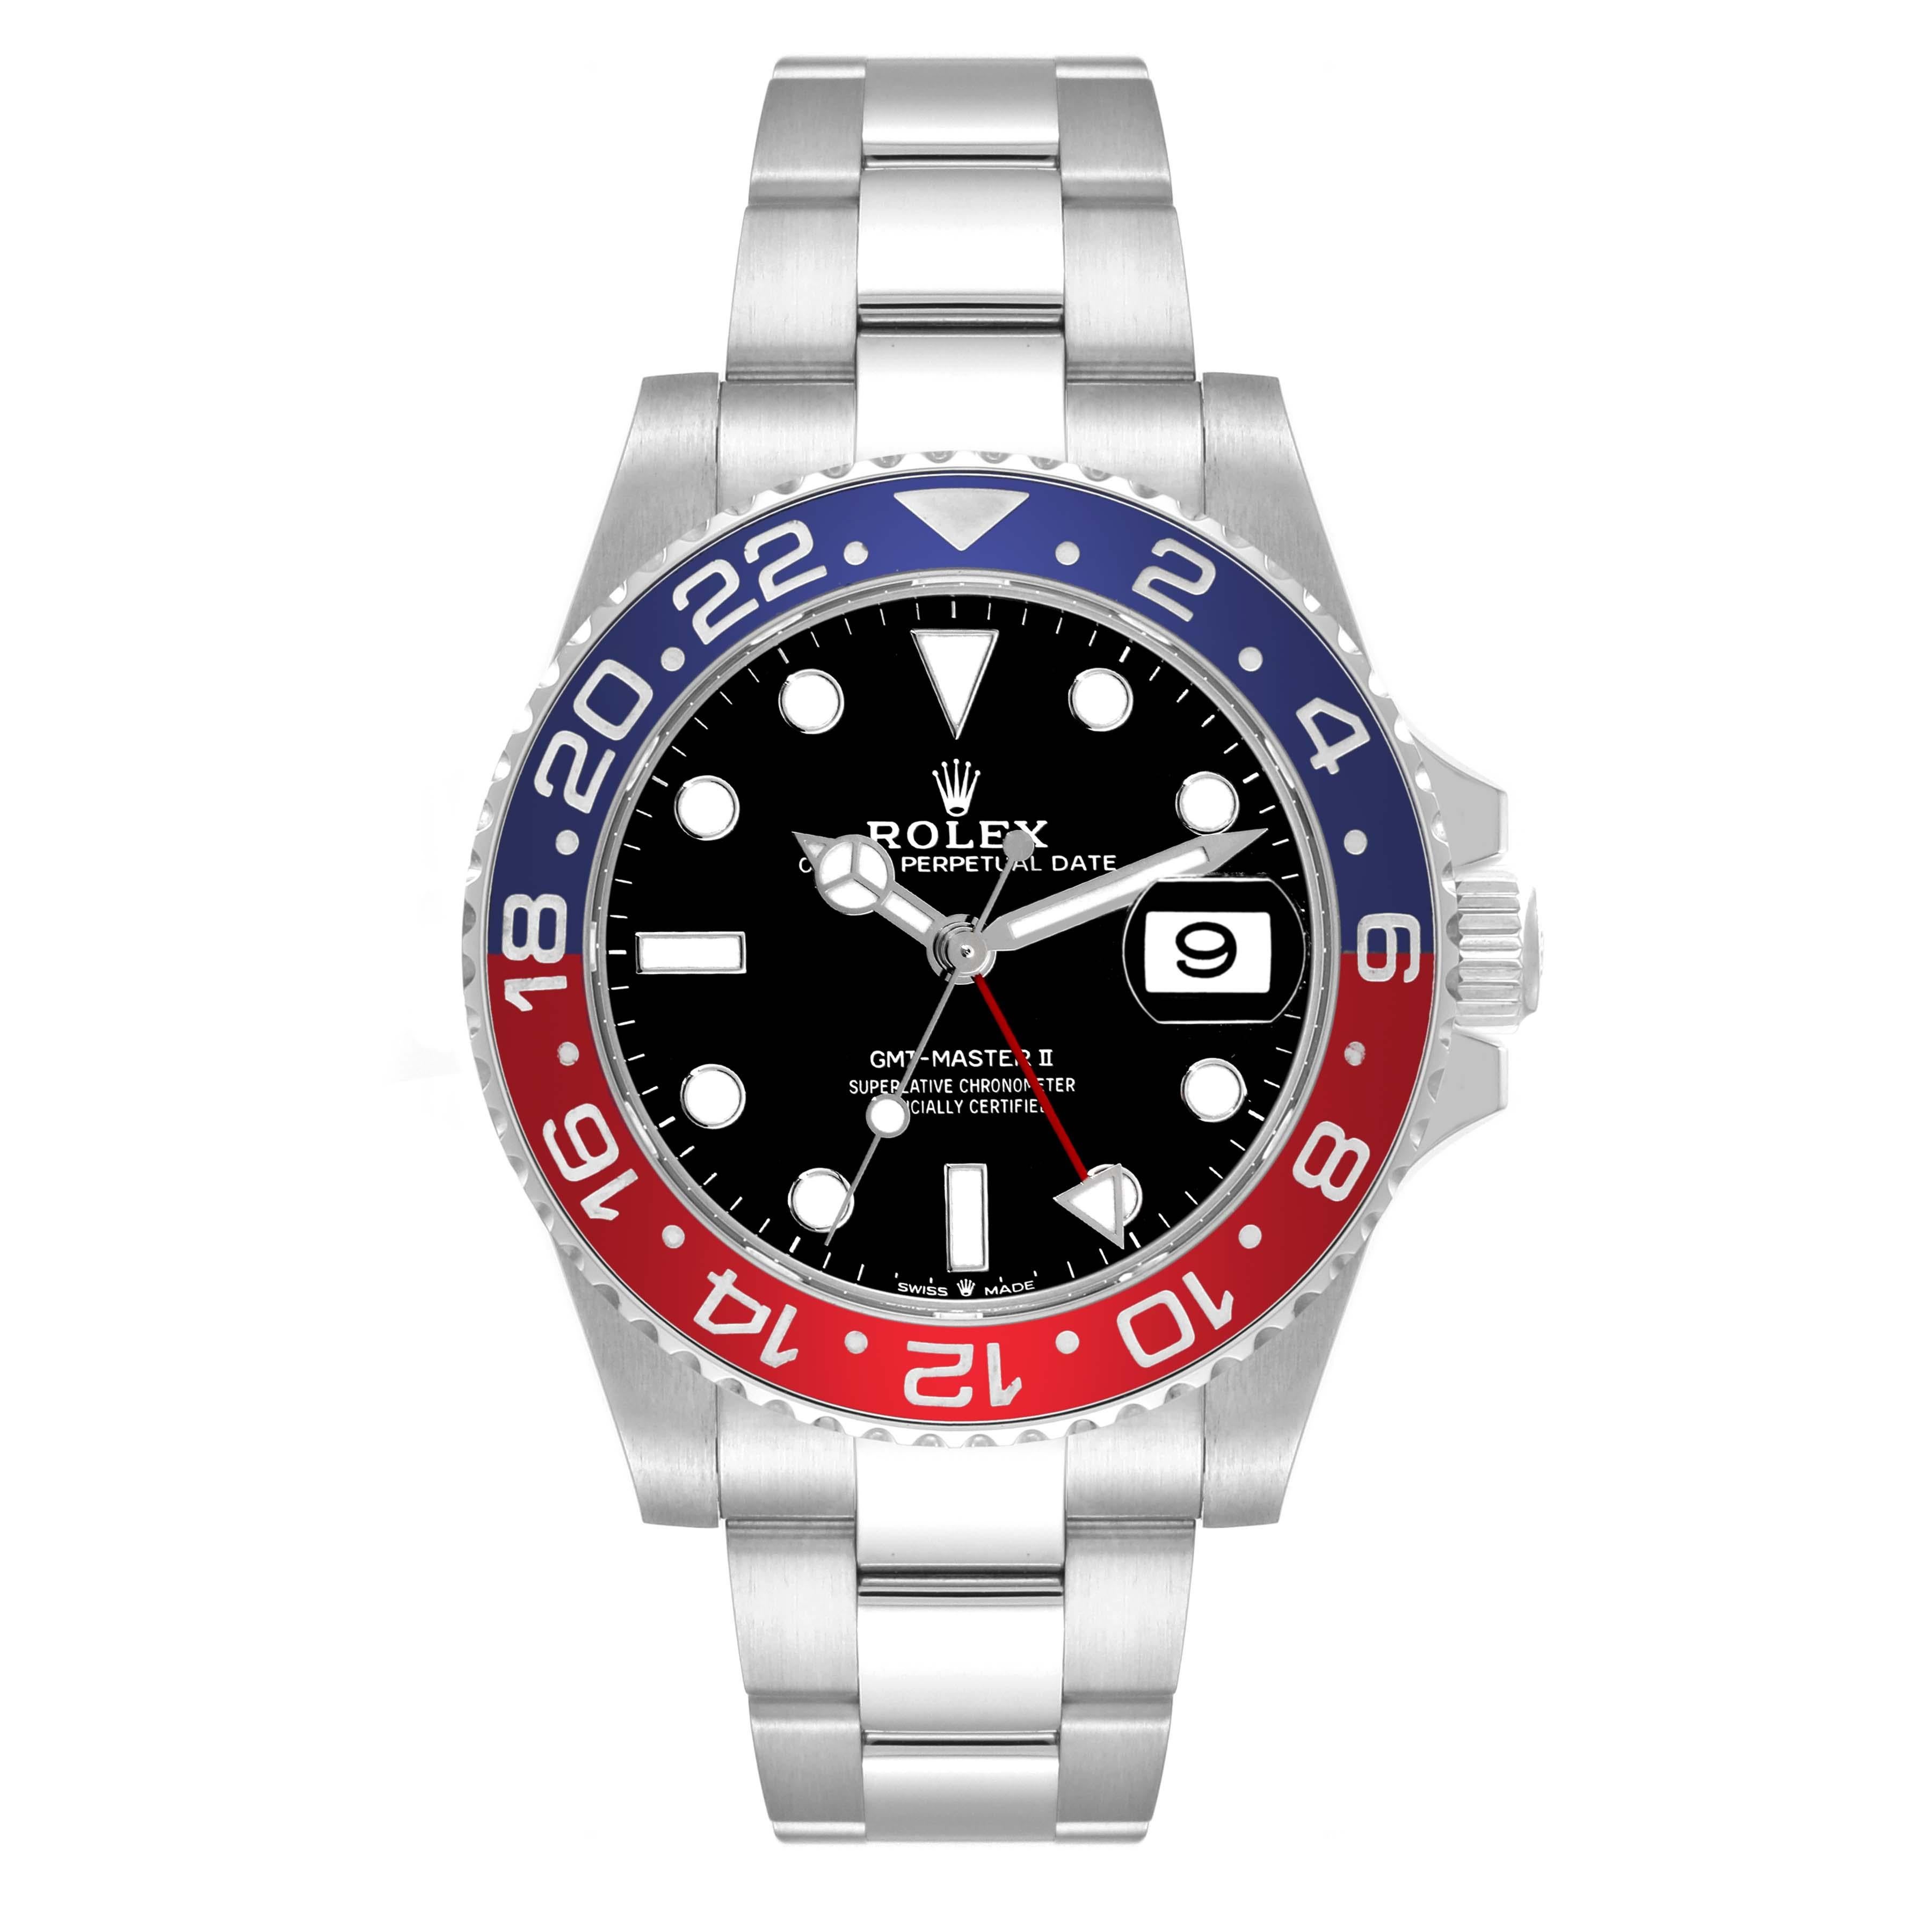 Rolex GMT Master II Blue Red Pepsi Bezel Steel Mens Watch 126710 Box Card In Excellent Condition For Sale In Atlanta, GA